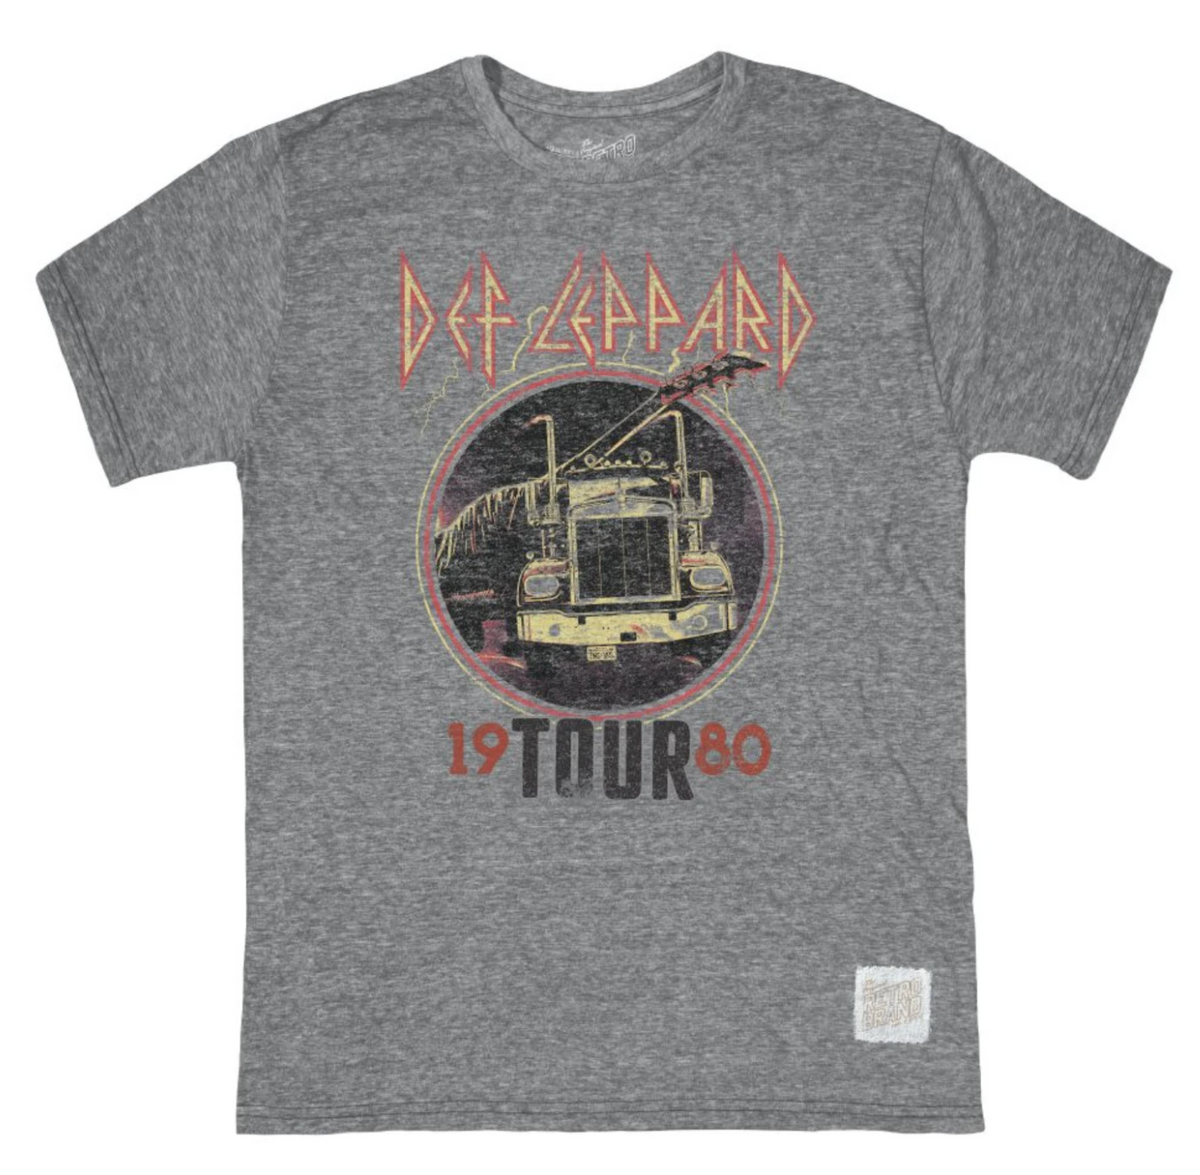 Def Leppard 1980 Tour logo featuring rock and roll rig on our short sleeve tri-blend unisex tee in streaky gray.